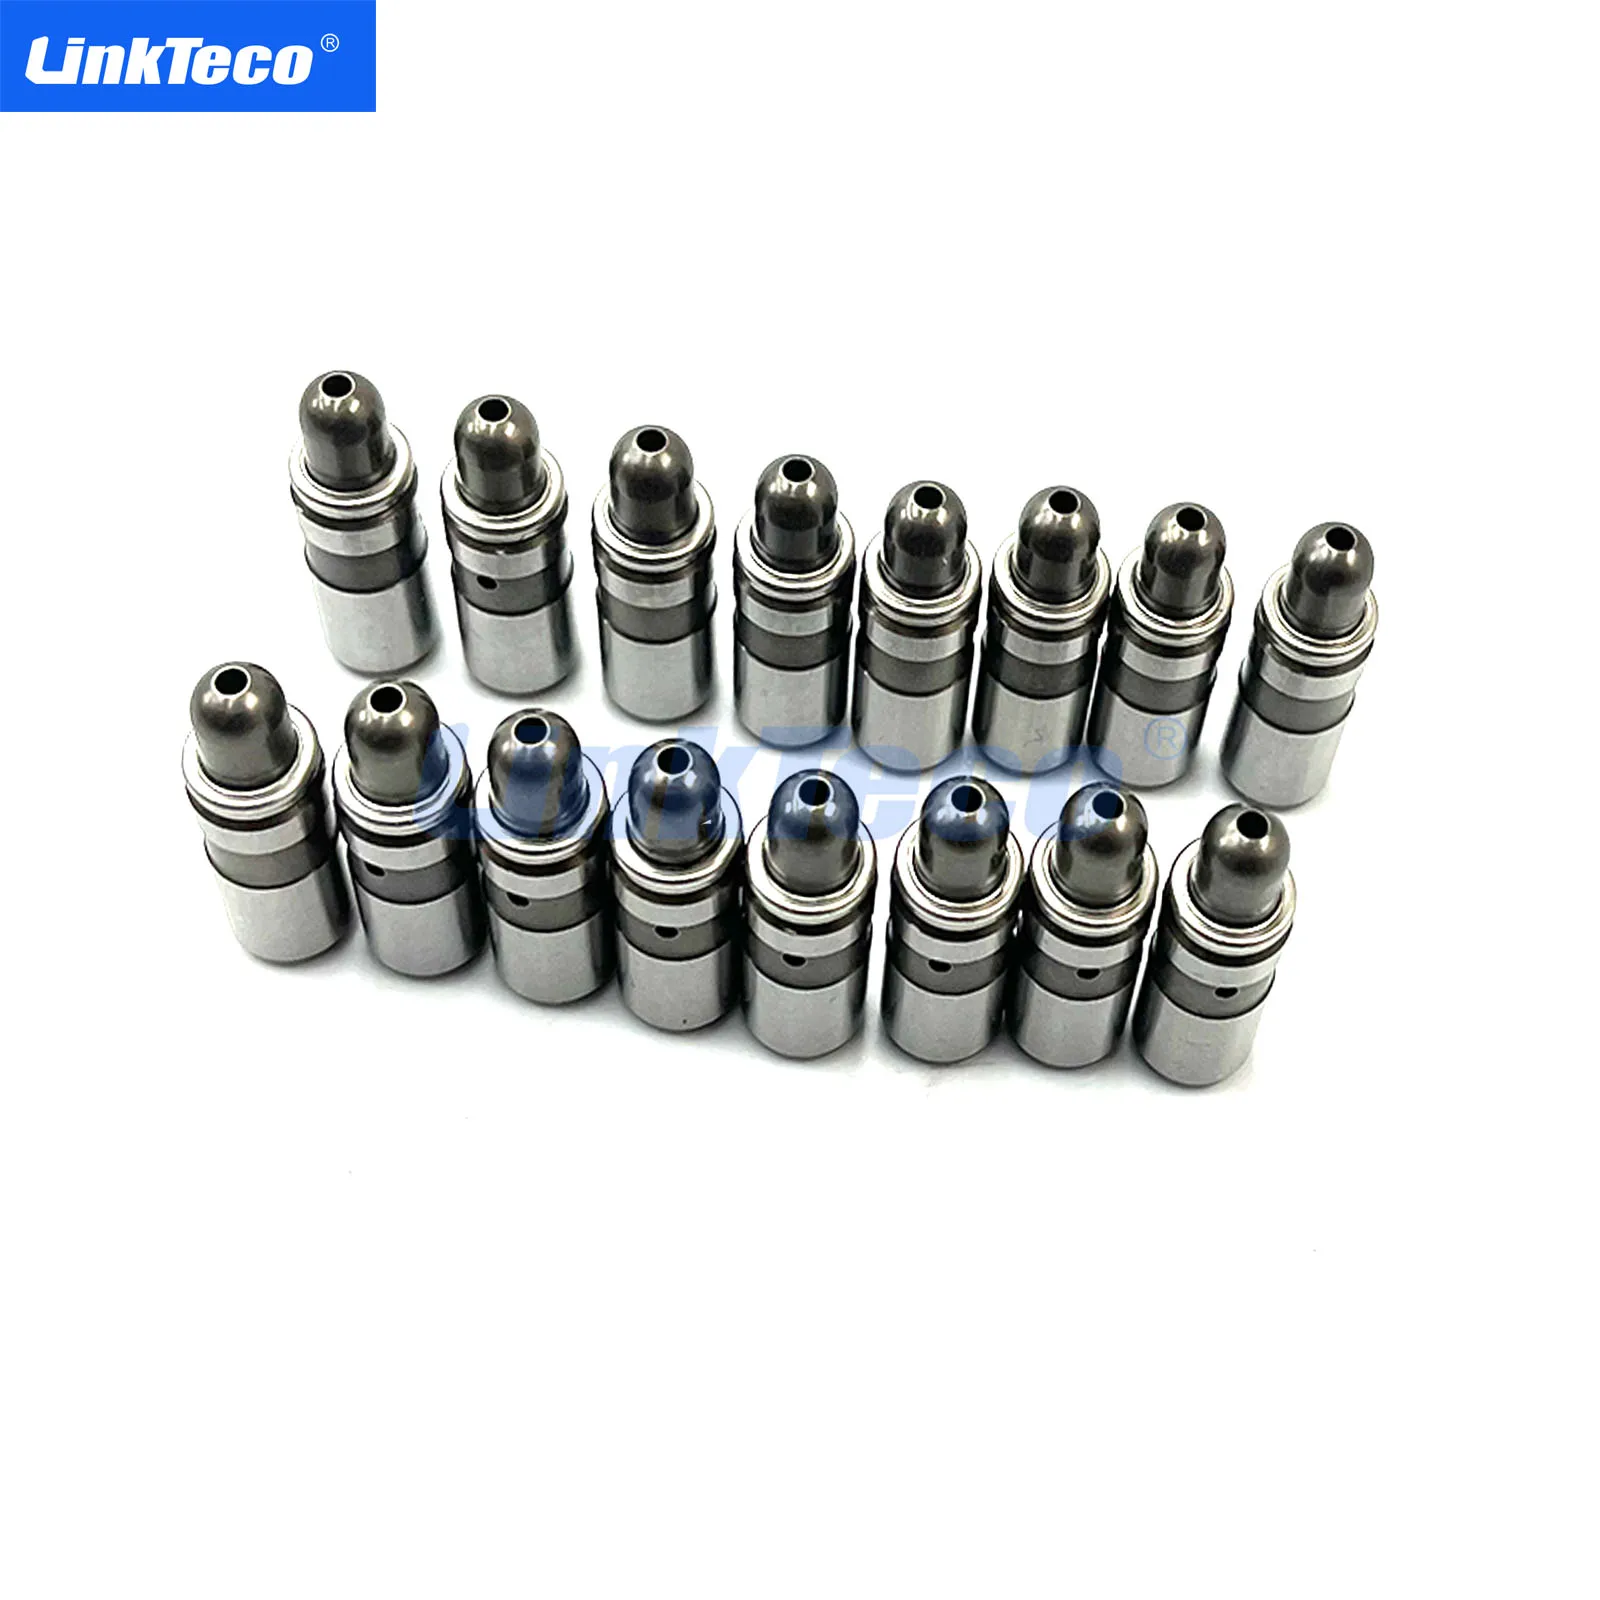 16 Valve Lifters For Cadillac Chevrolet Buick GMC HL129 OEM 12572638  AliExpress